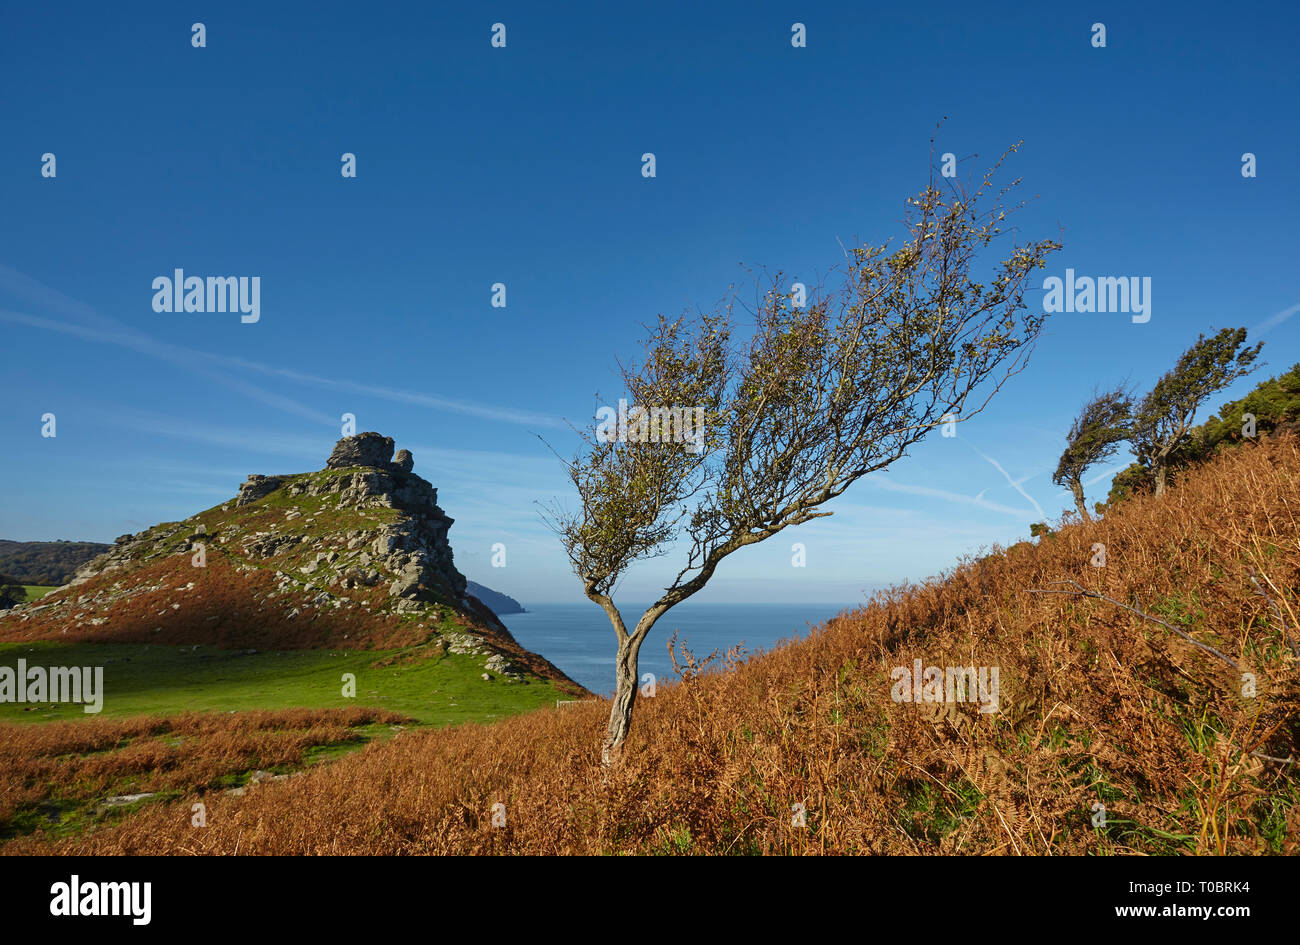 A wind-gnarled hawthorn tree on the coast, in the Valley of Rocks, near Lynton, in Exmoor National Park, Devon, Great Britain. Stock Photo